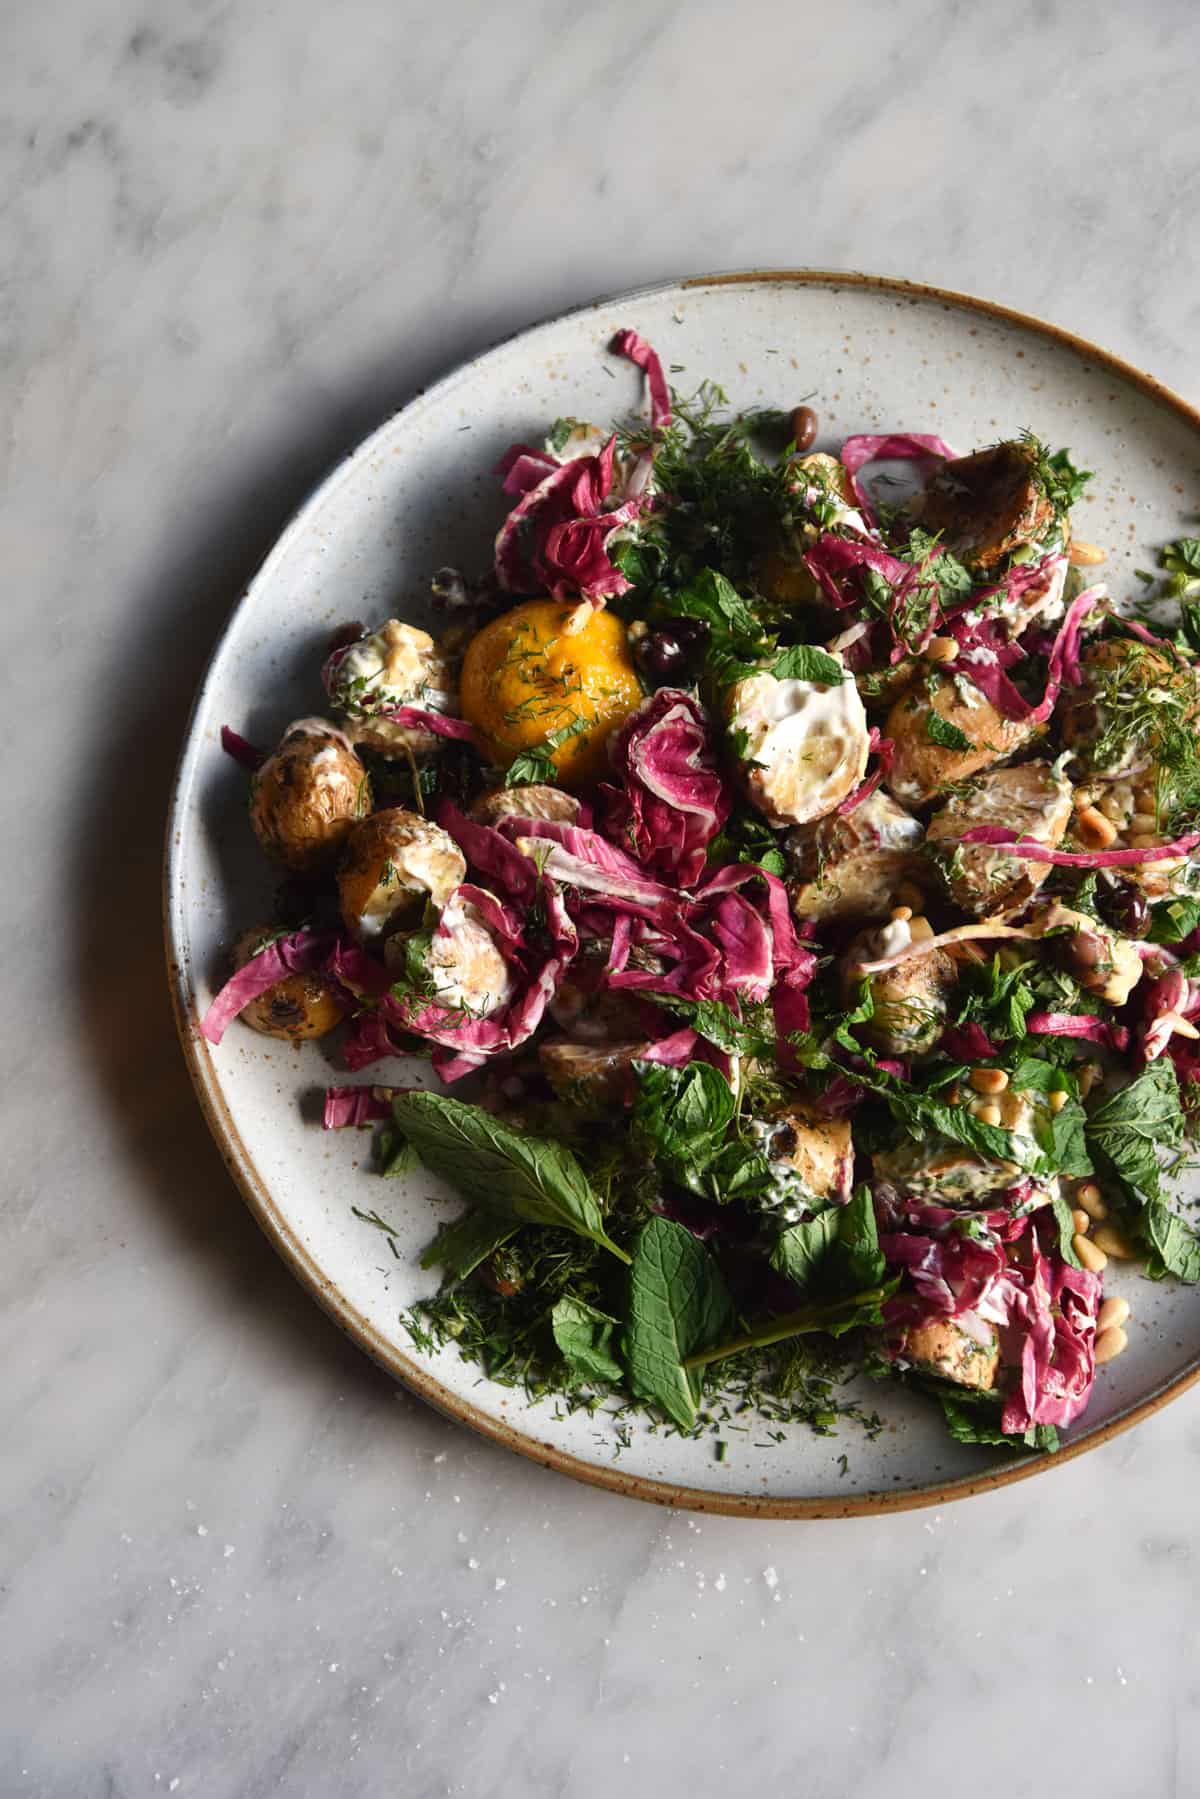 An aerial image of a vegan potato salad with a zingy mayo dressing, radicchio, olives, pine nuts and fresh herbs on a white ceramic plate atop a white marble table